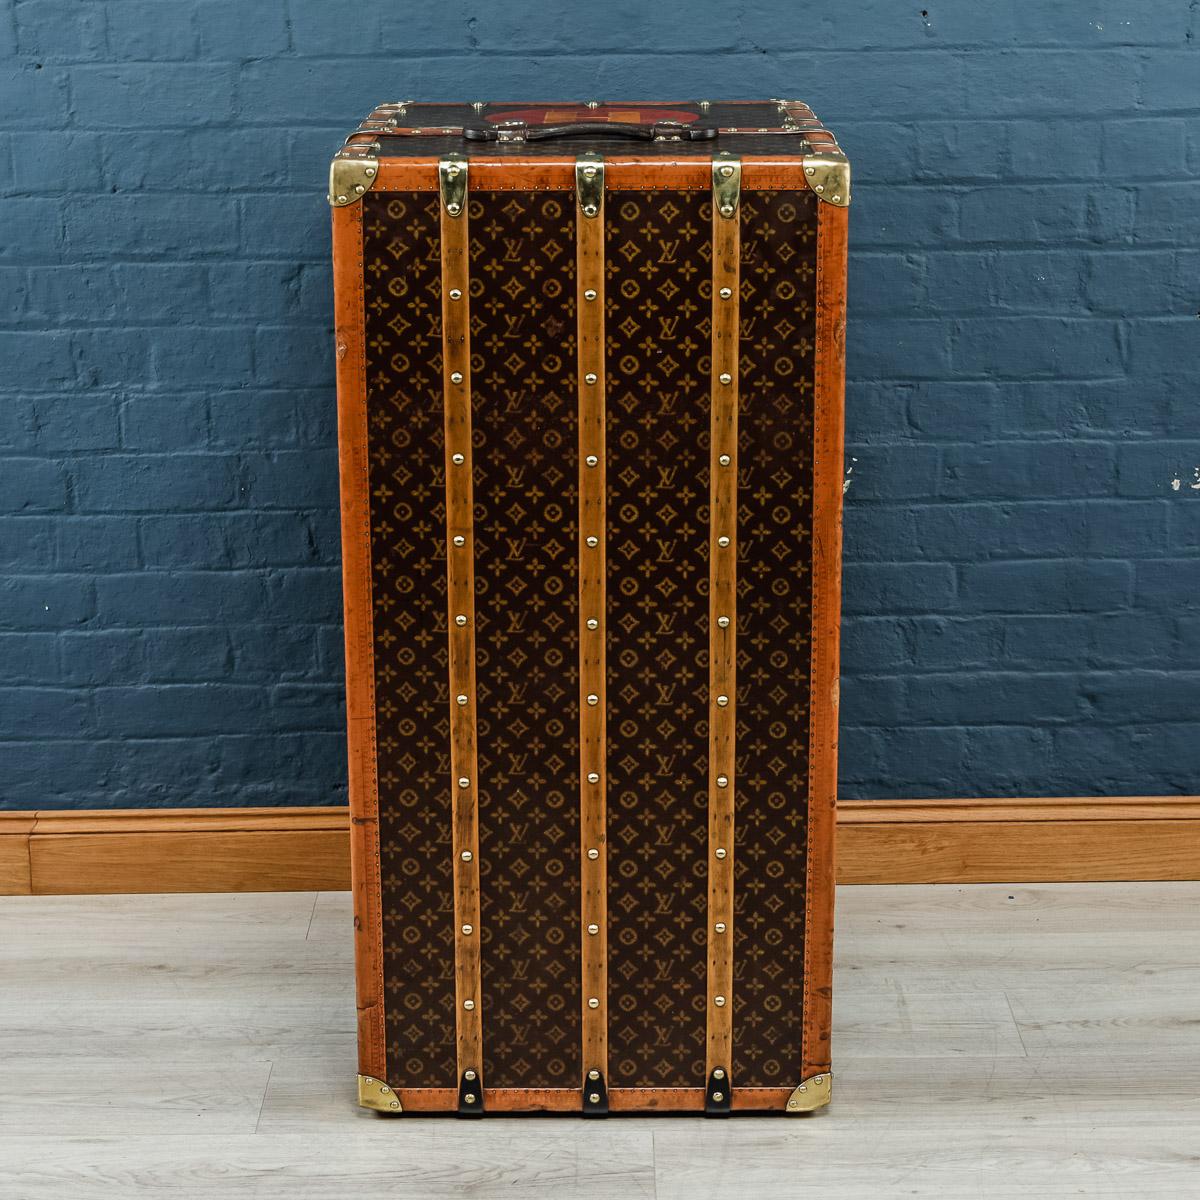 Desciption:

Stunning and most importantly complete, this early 20th century Louis Vuitton wardrobe trunk was the must have item of any elite traveler. Covered in the world famous LV monogrammed canvas, with its lozine borders and brass fitting it